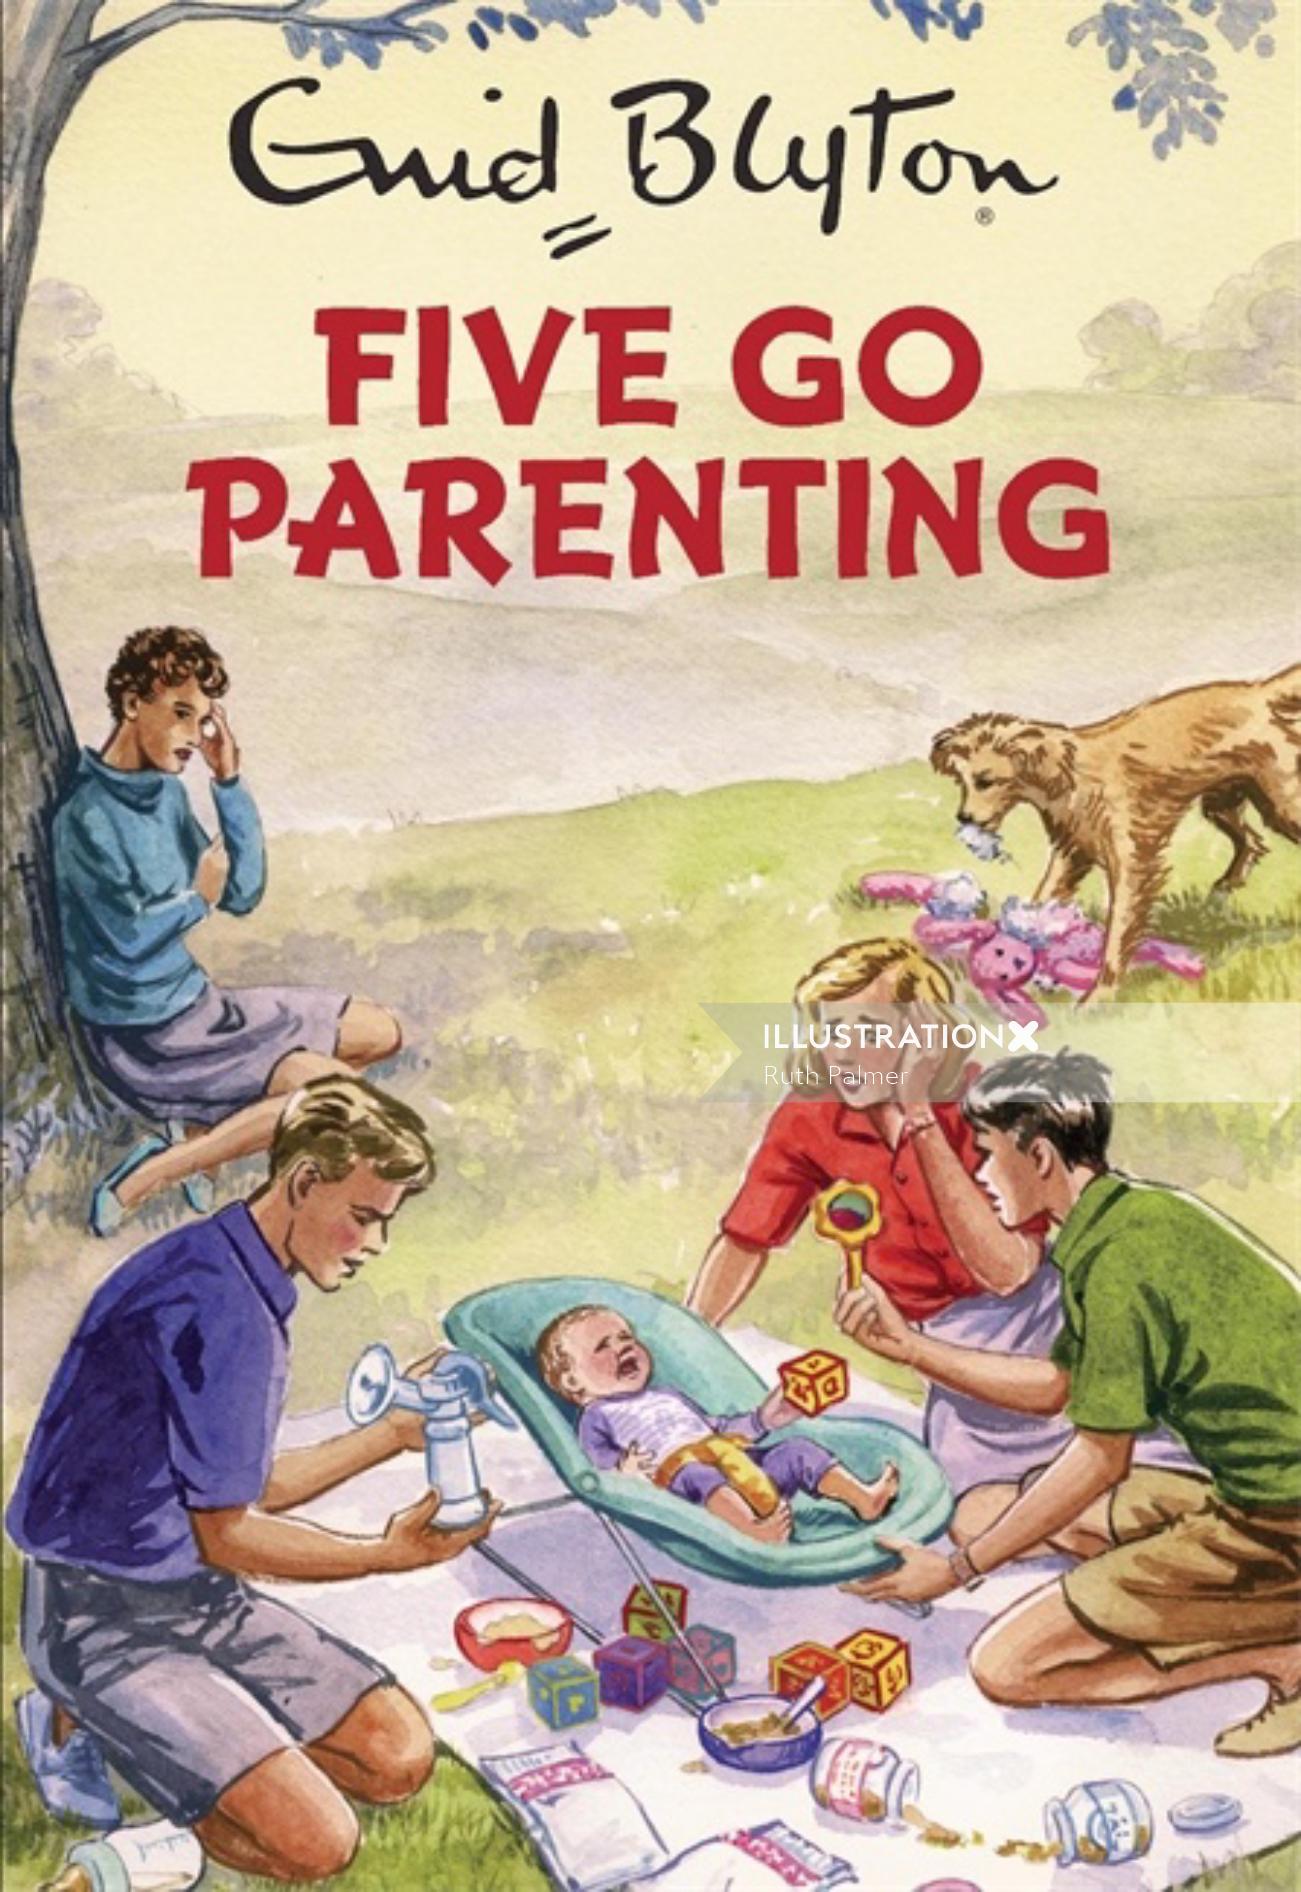 Five go parenting book cover illustration by ruth palmer